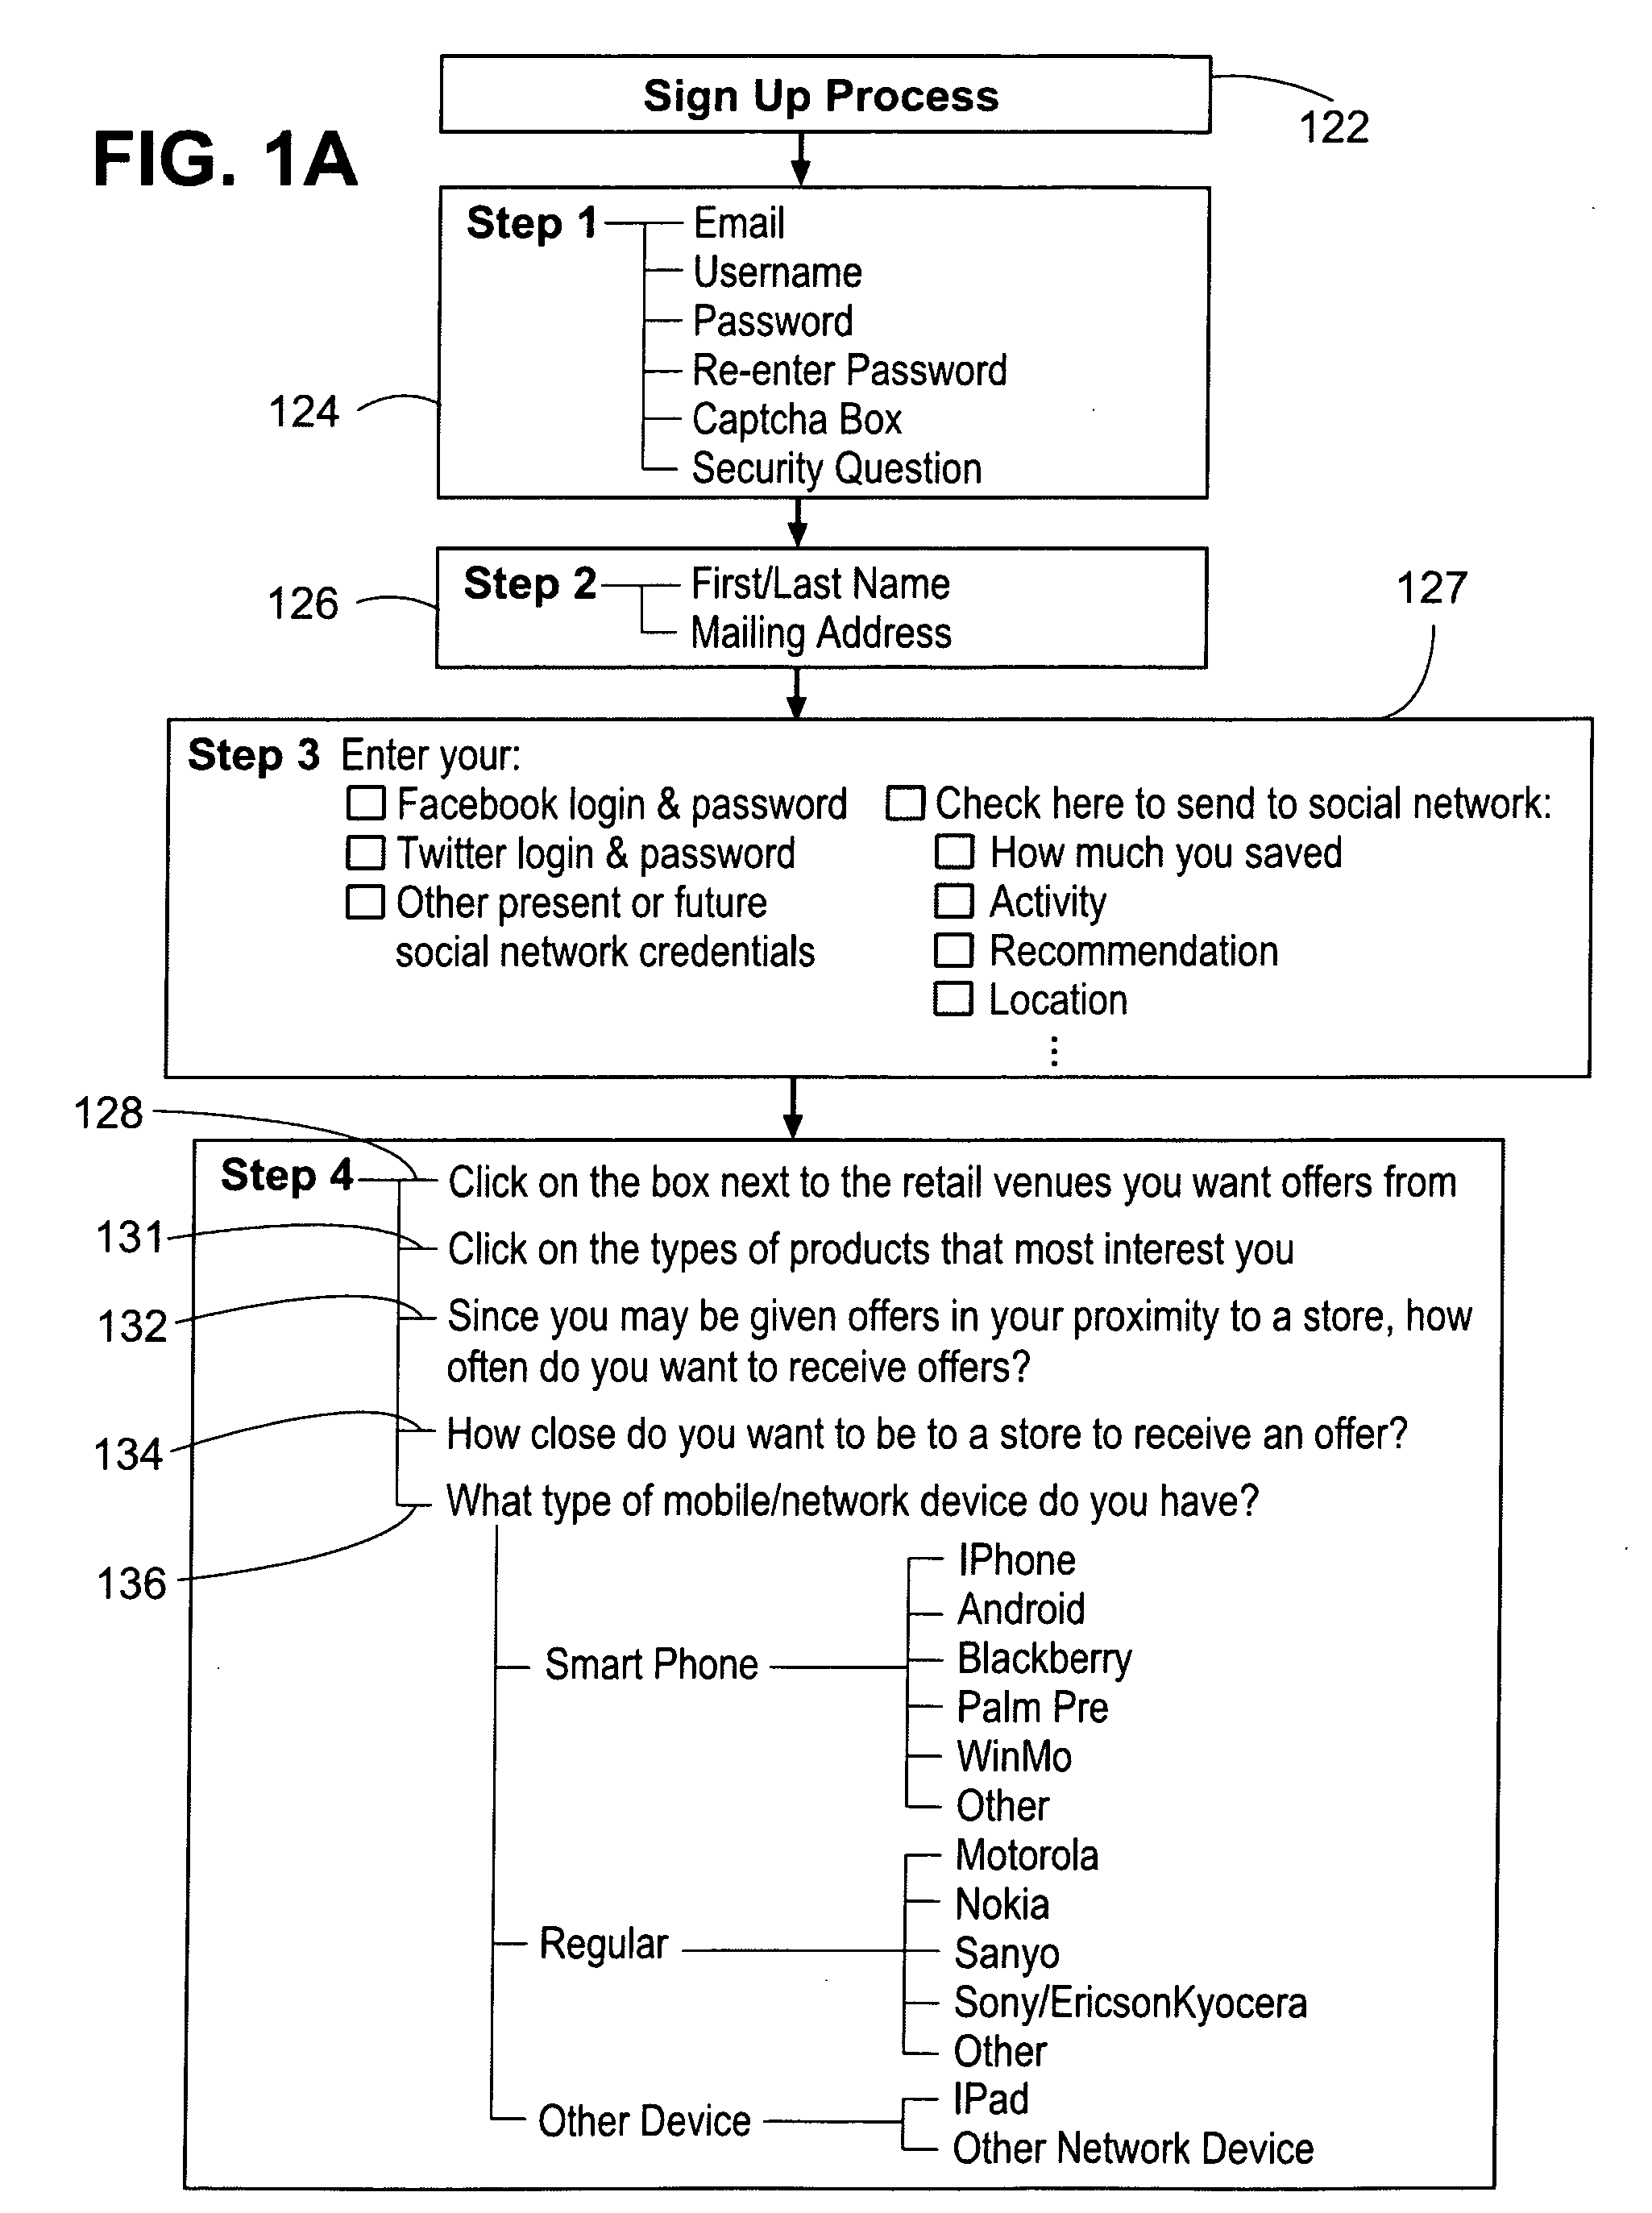 Method for electronic coupon creation, deployment, transference, validation management, clearance, redemption and reporting system and and method for interactive participation of individuals and groups with coupons